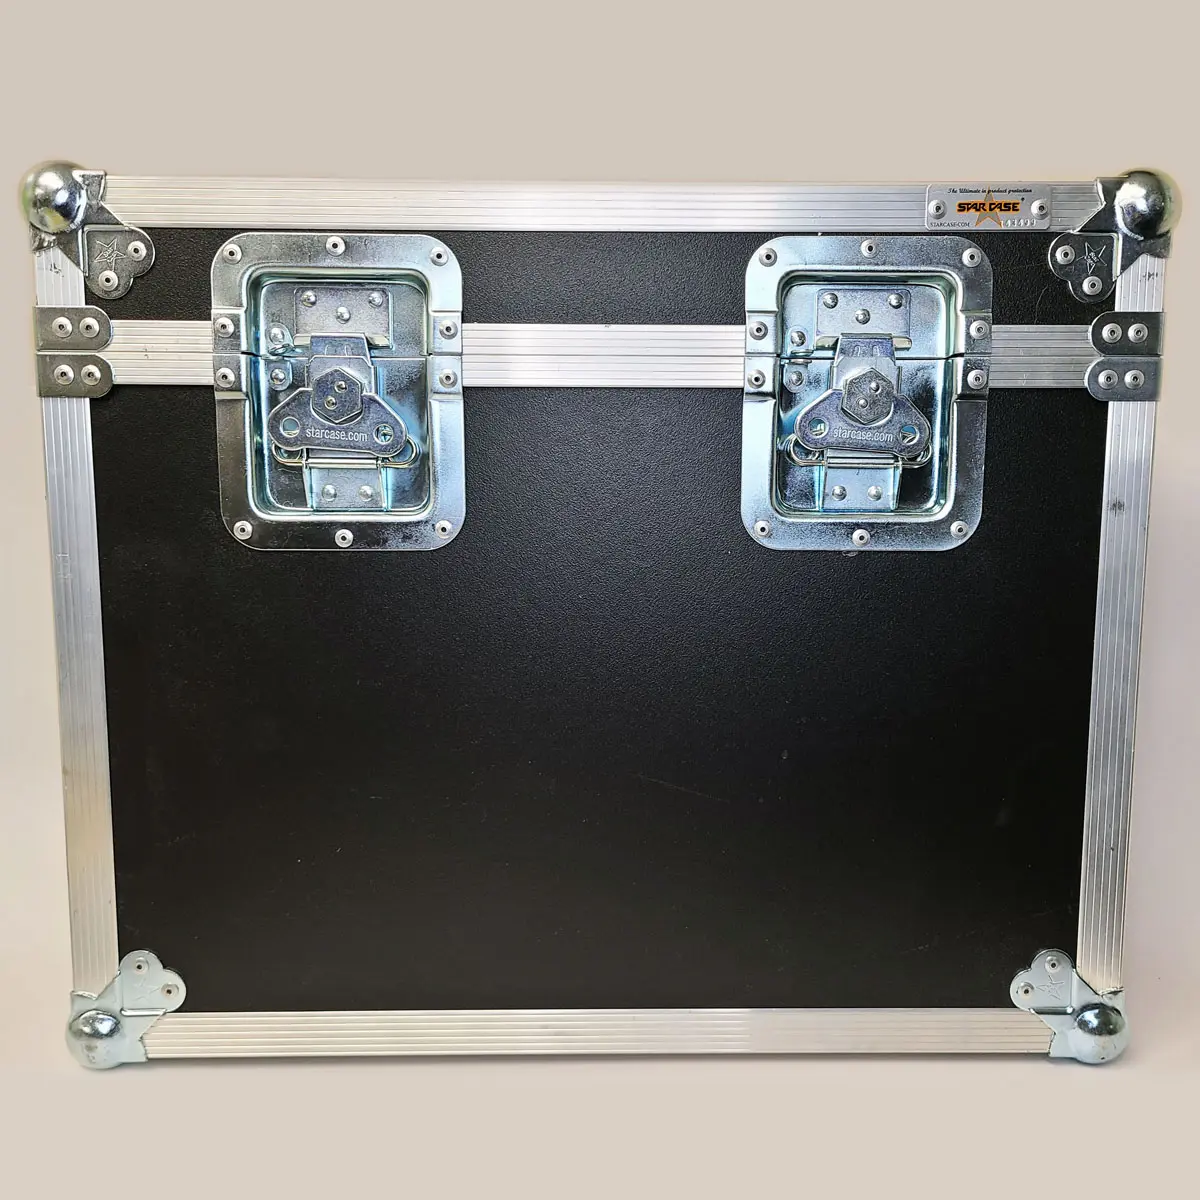 A black plastic road case with silver hardware